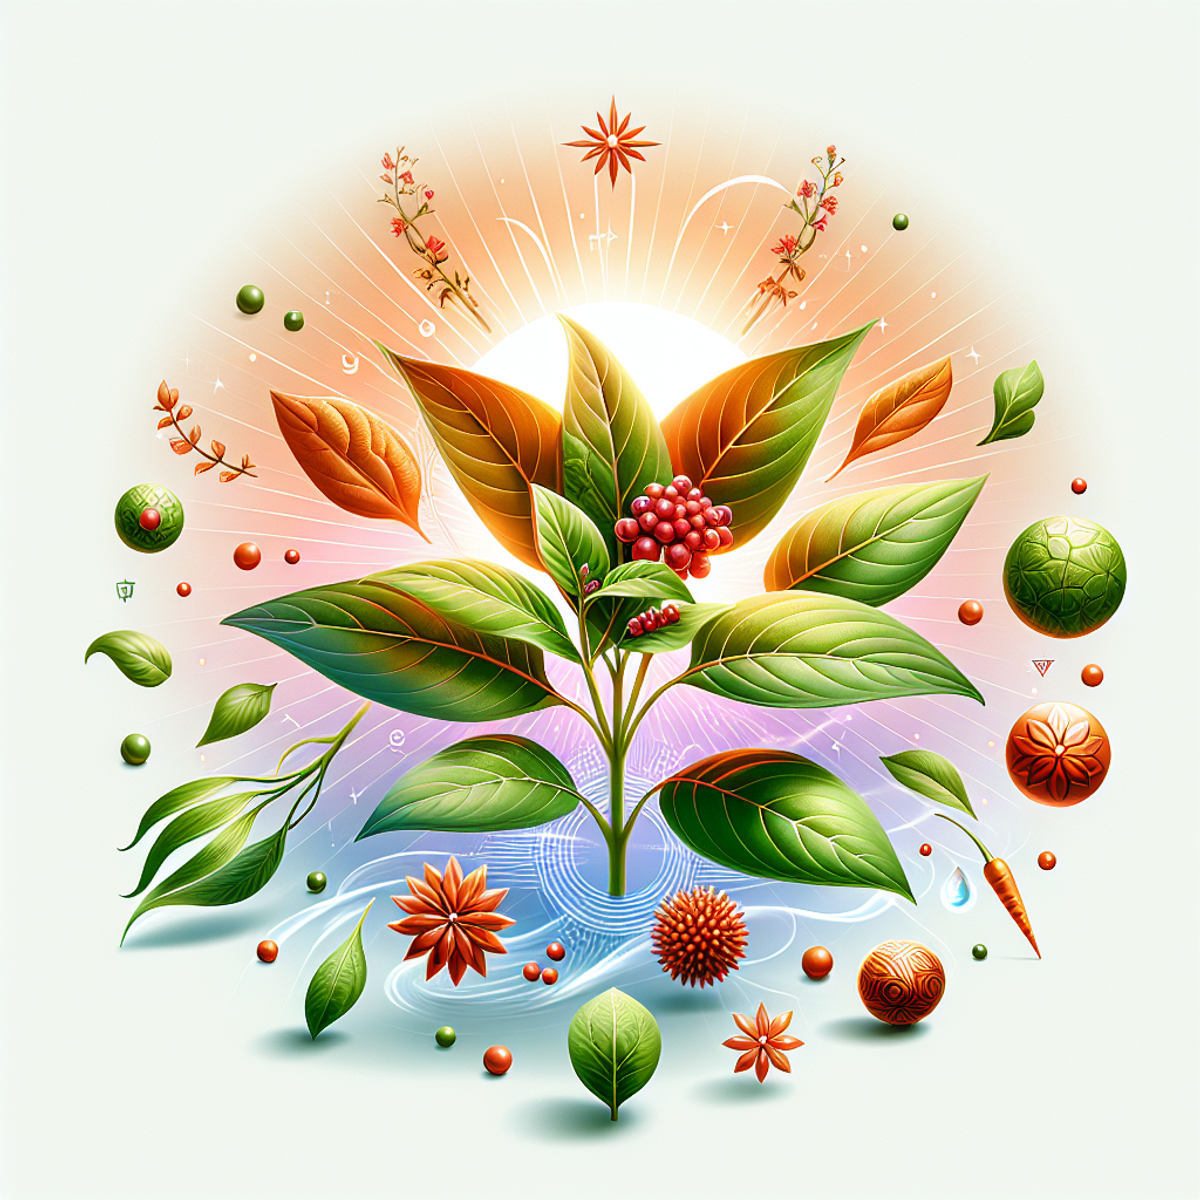 Vibrant illustration of Ashwagandha plant surrounded by symbols of health and vitality.